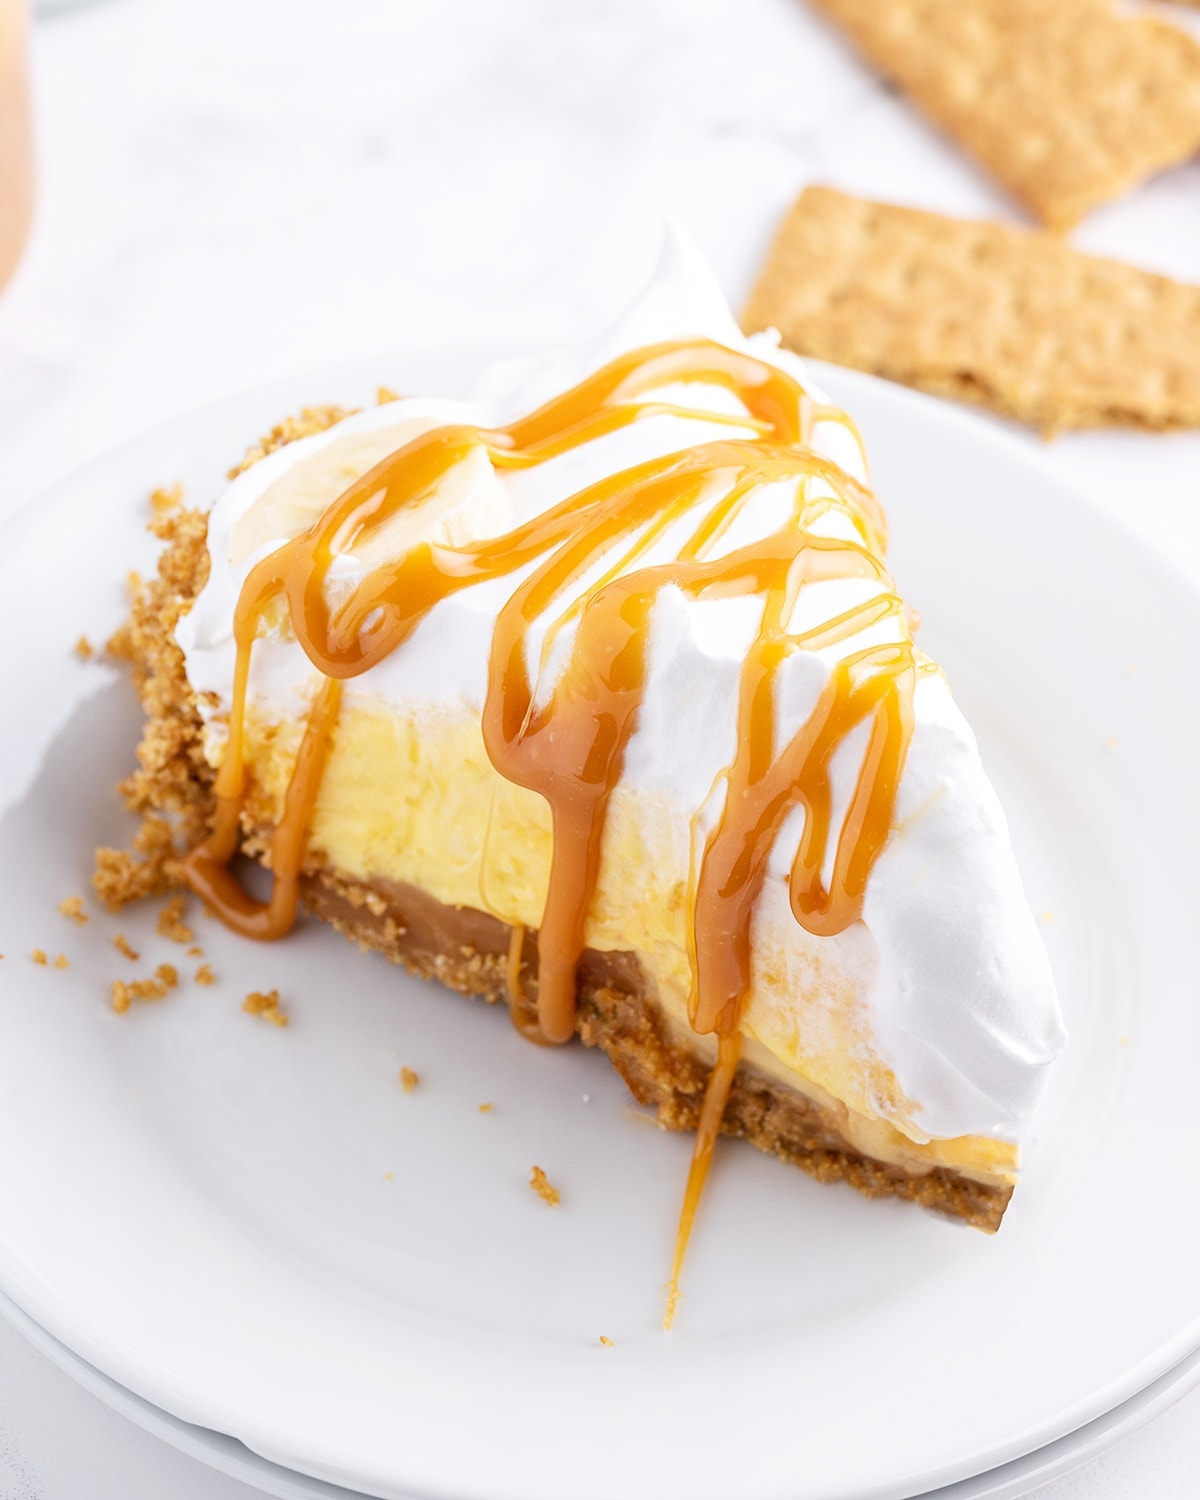 A slice of caramel banana cream pie on a white plate topped with caramel sauce.